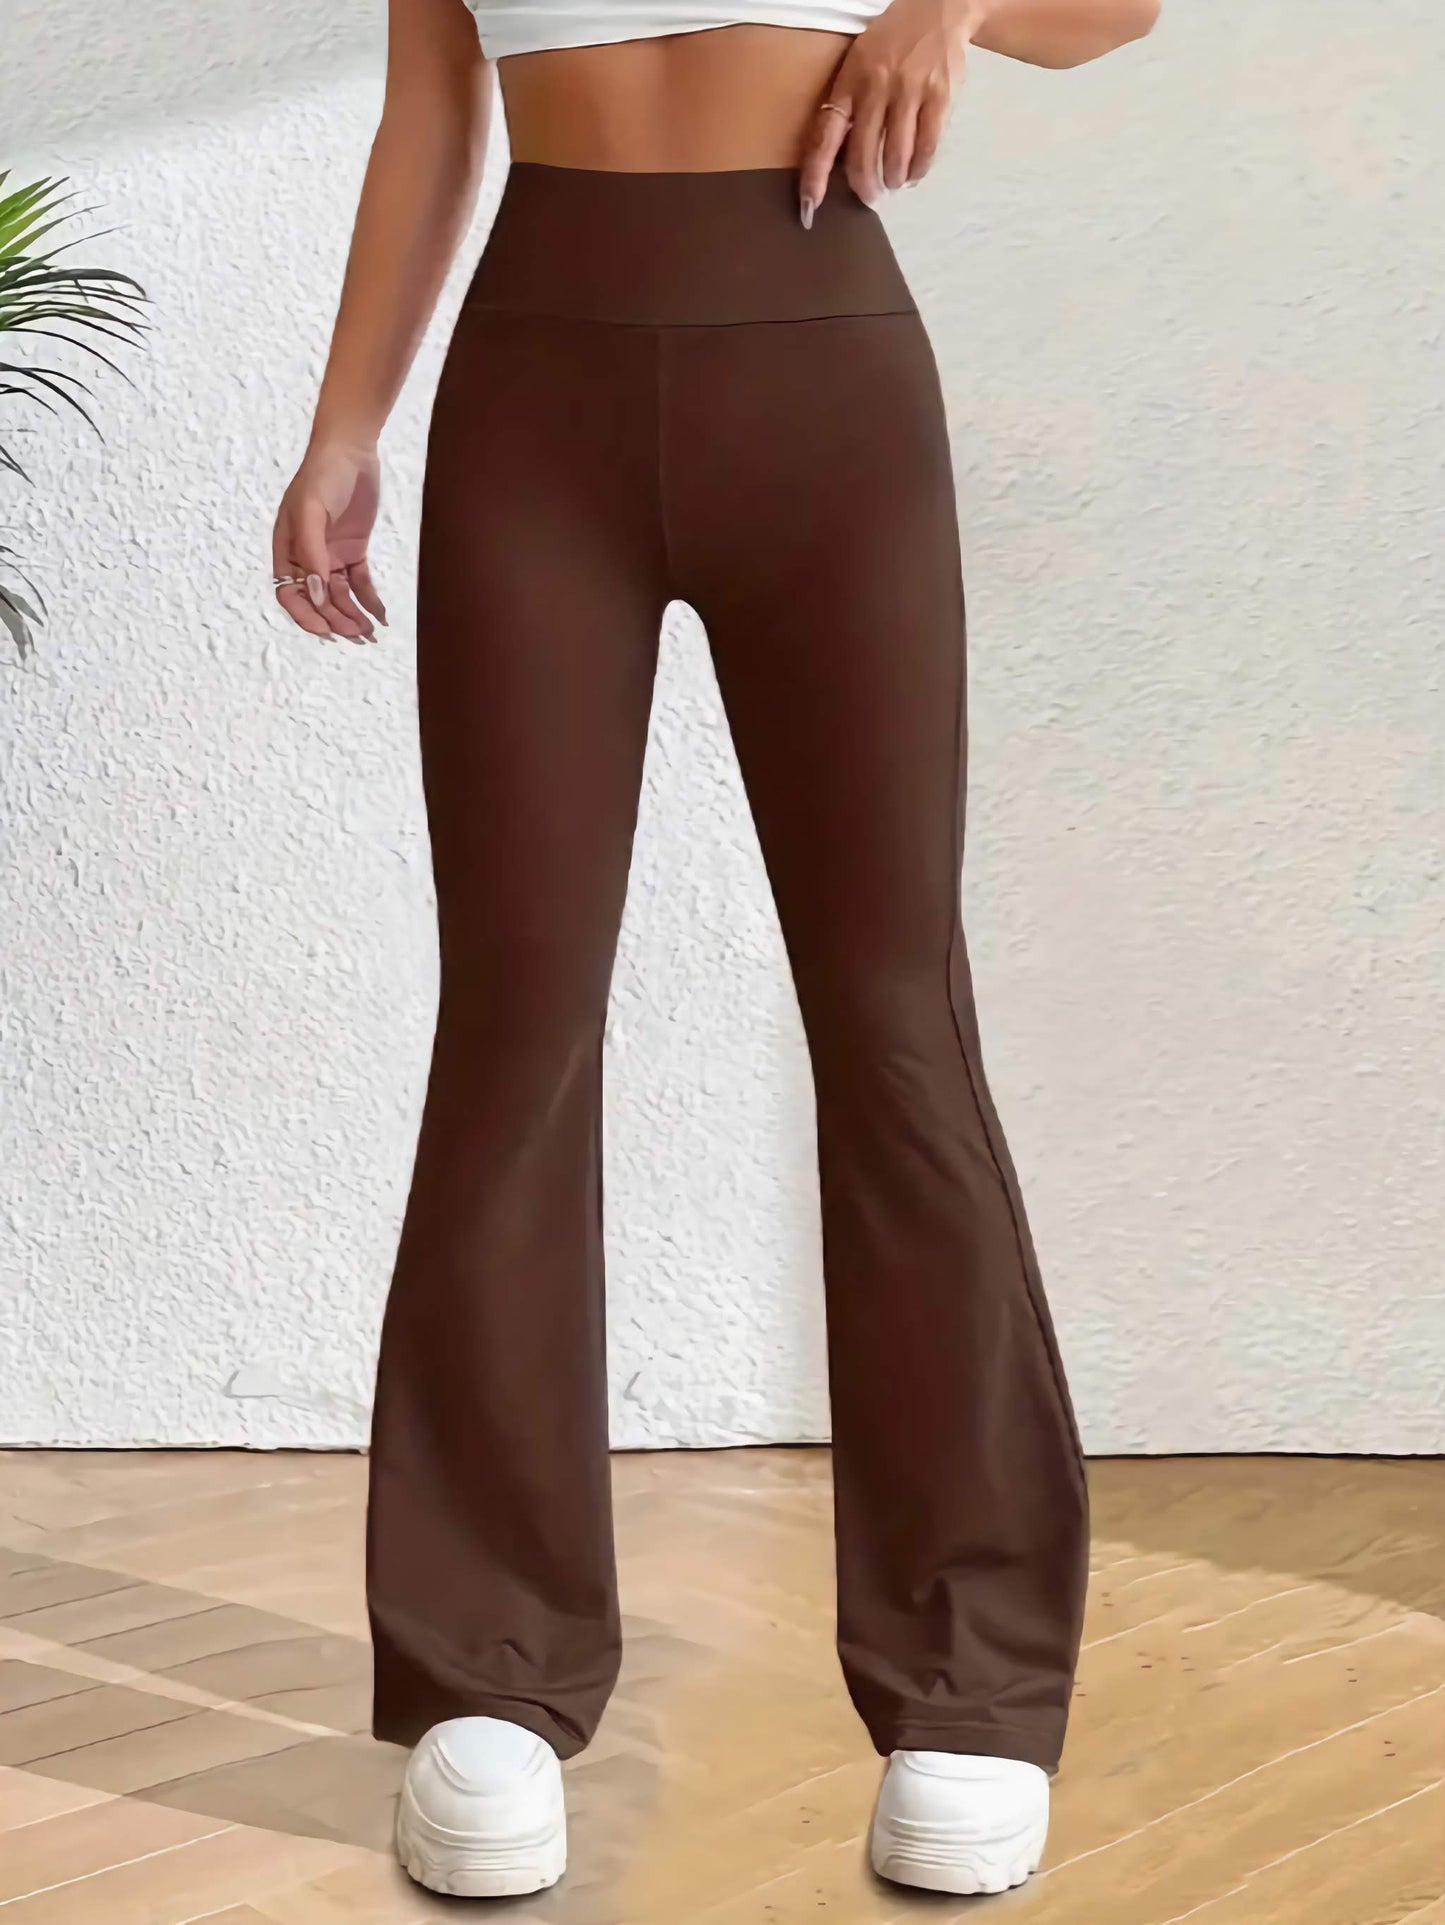 Ladies Brown Flared leggings : Trendy and Flattering for All Body Types